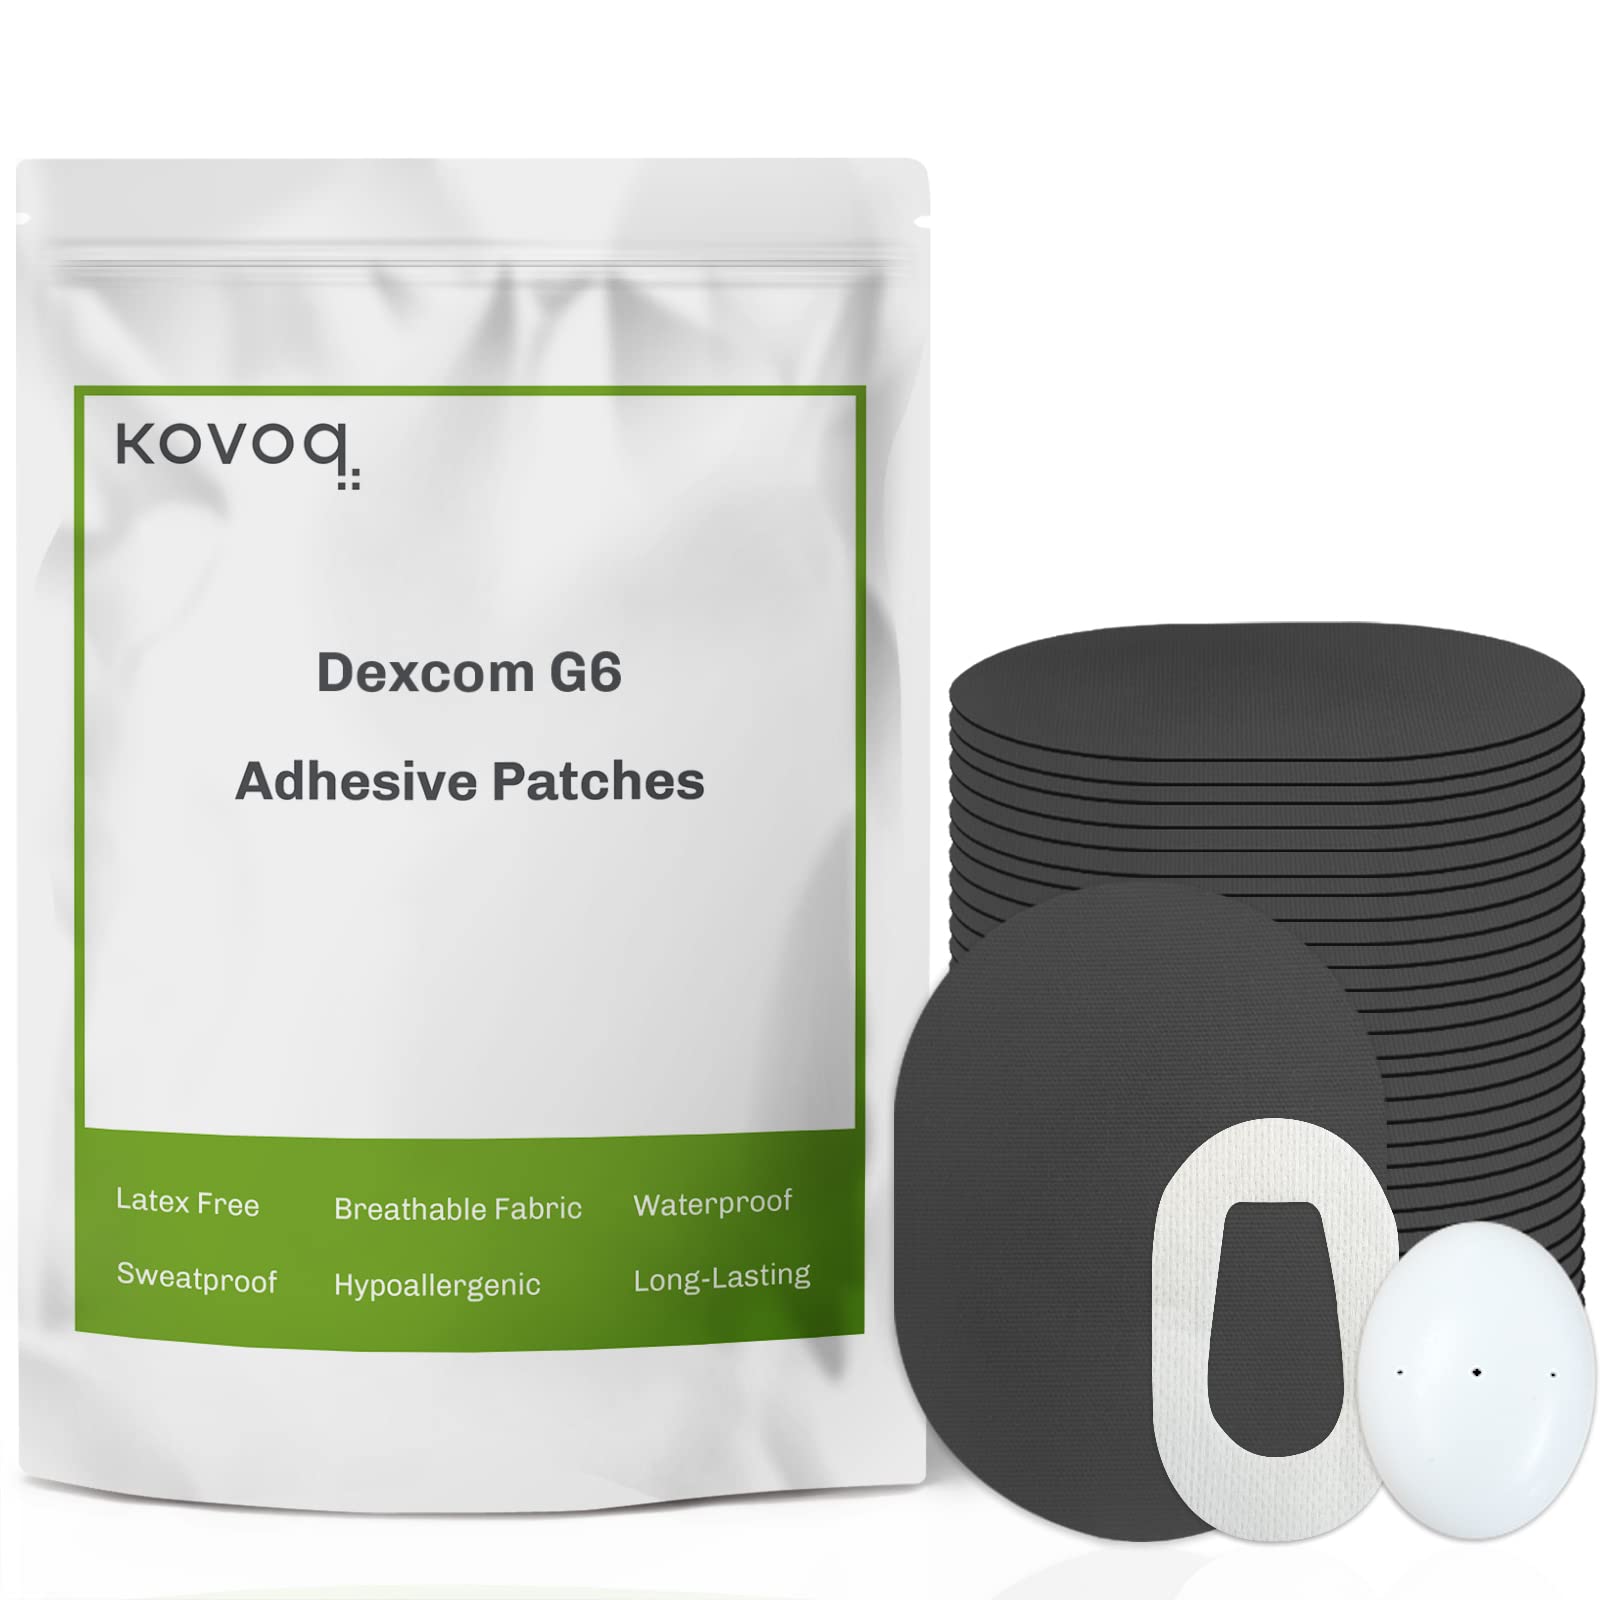 Dexcom G6 Adhesive Patches - 20 Pack - Waterproof, Hypoallergenic, Multiple  Color Options (Black,Gray,White)